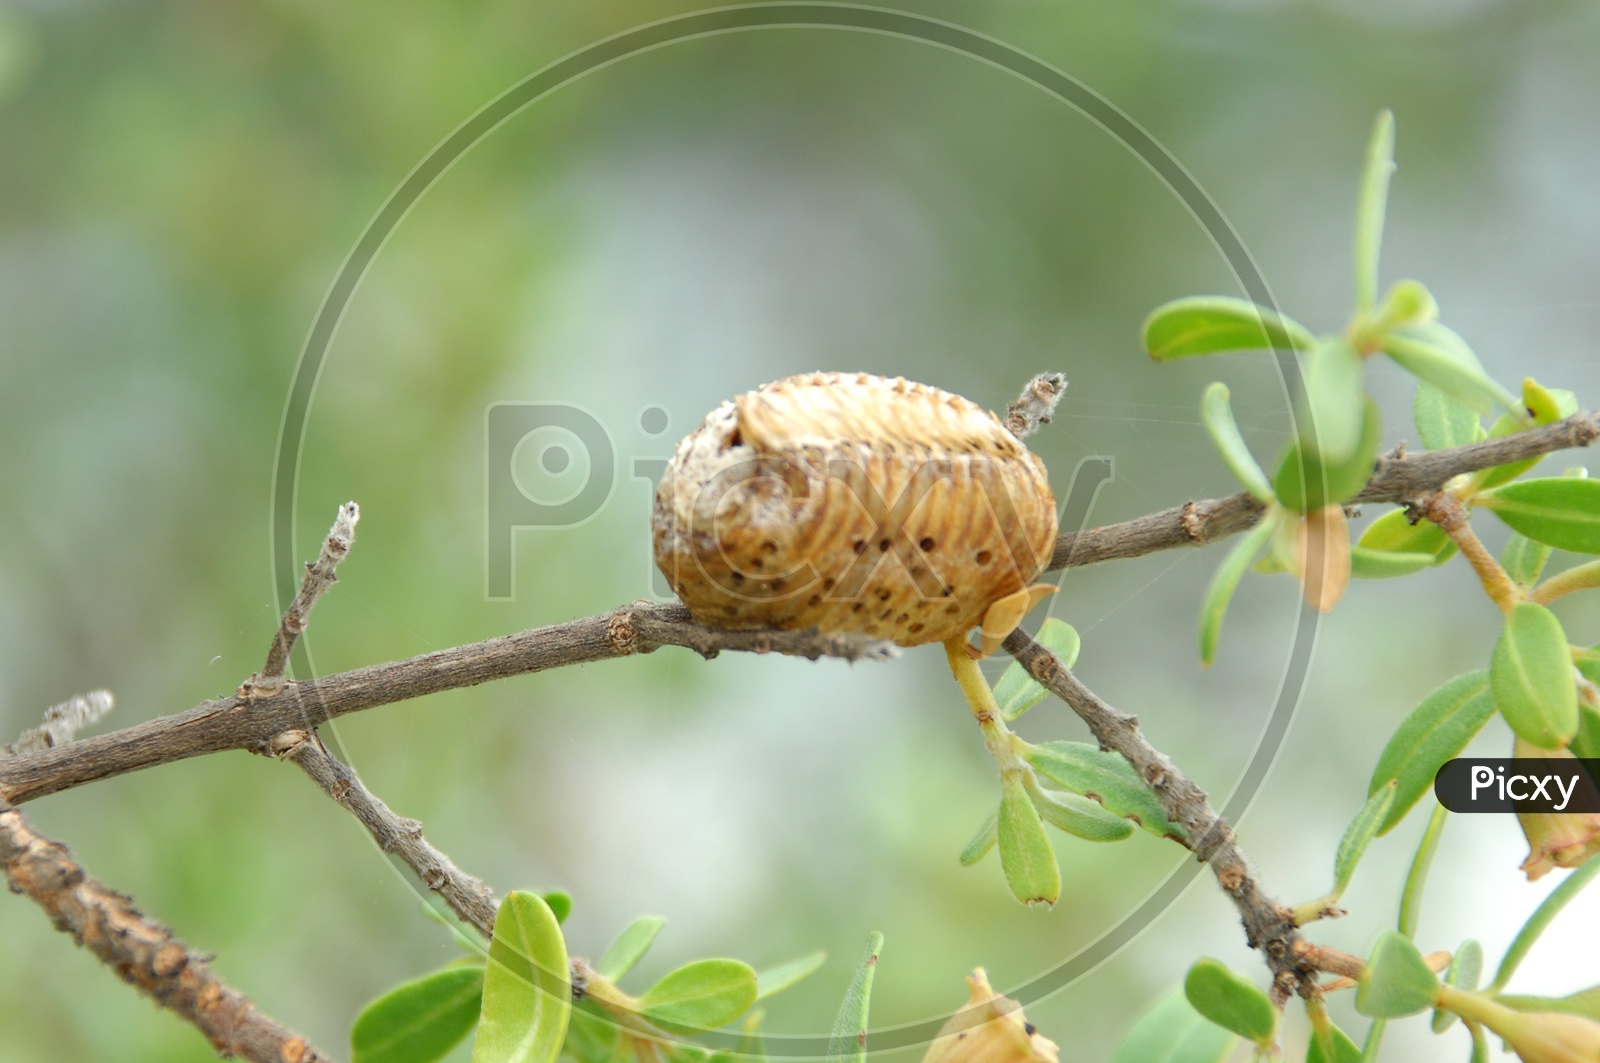 Larva Cocoon on a Plant